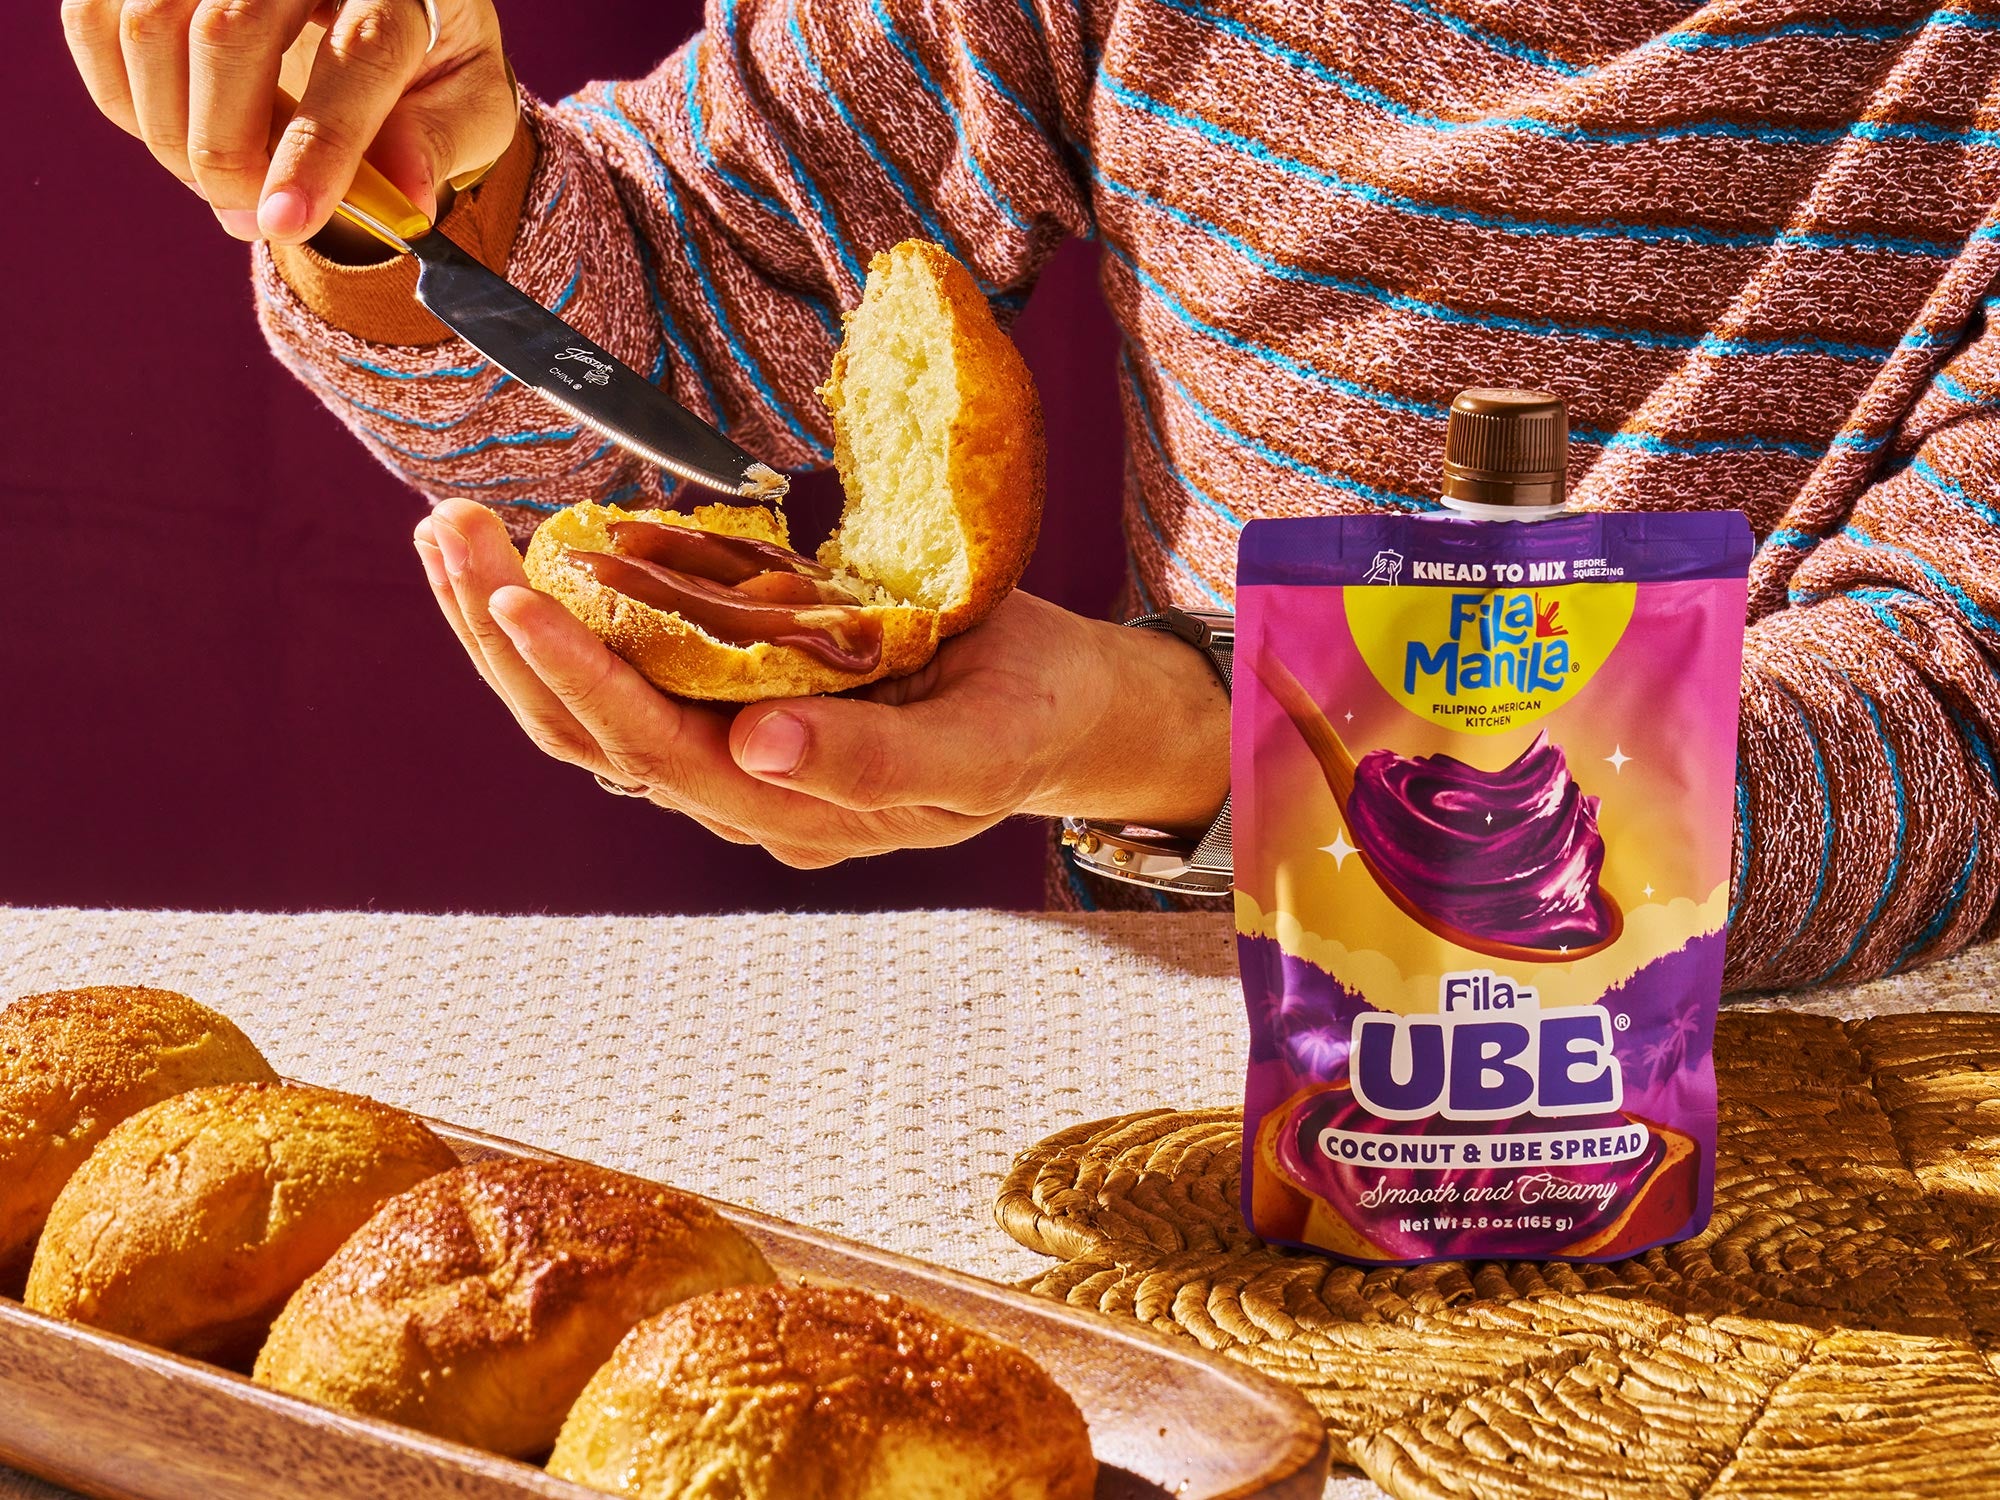 Ube being spread on bread